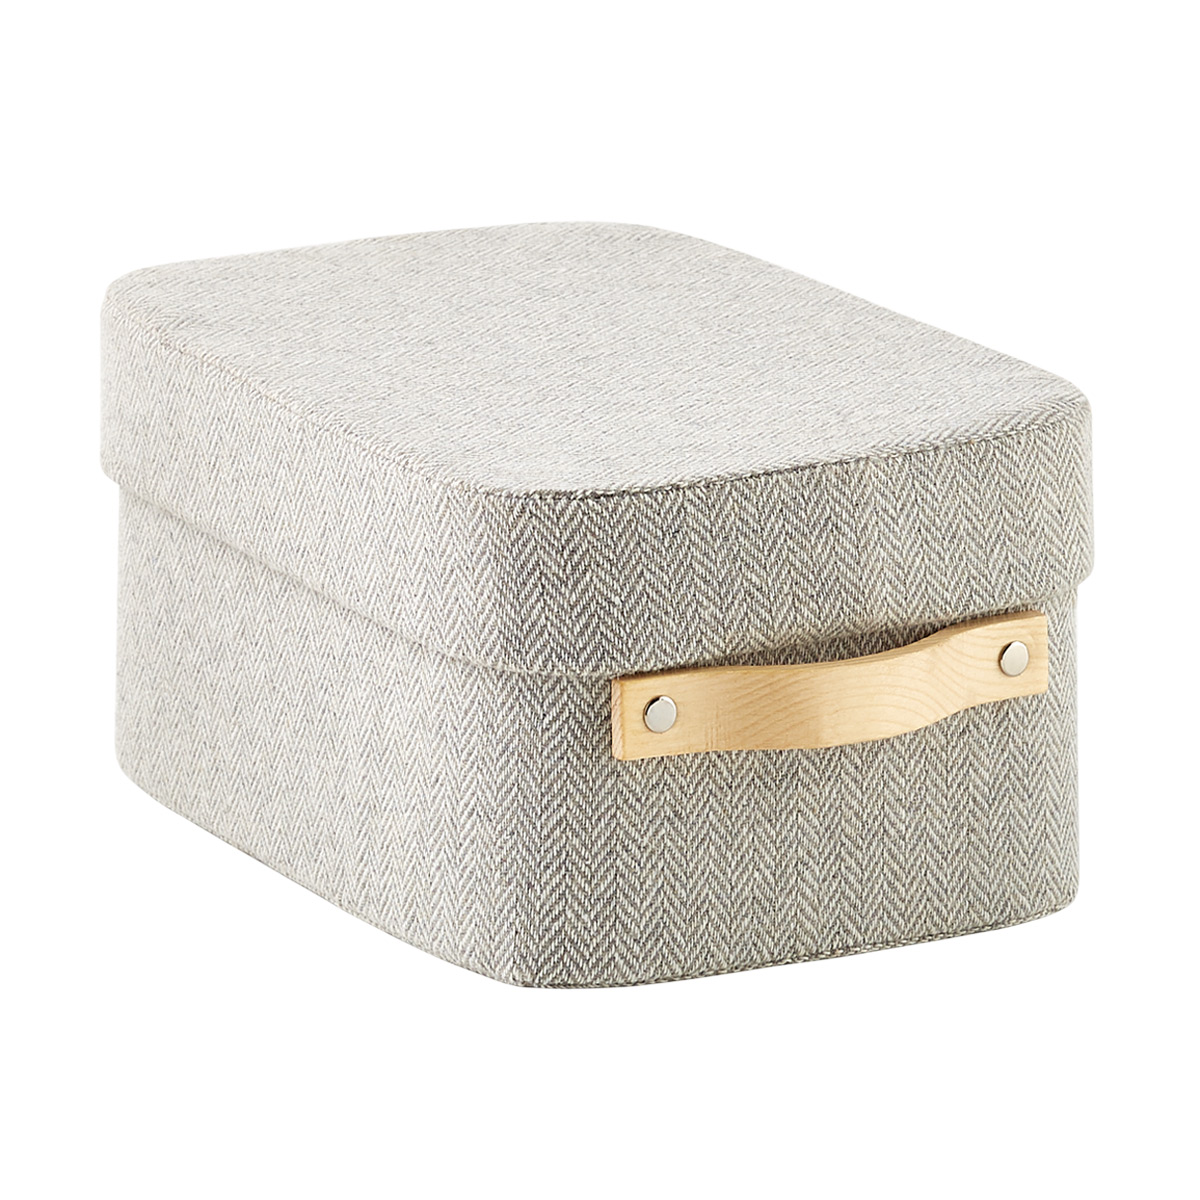 Small Herringbone Box w/ Wooden Handles Grey | The Container Store